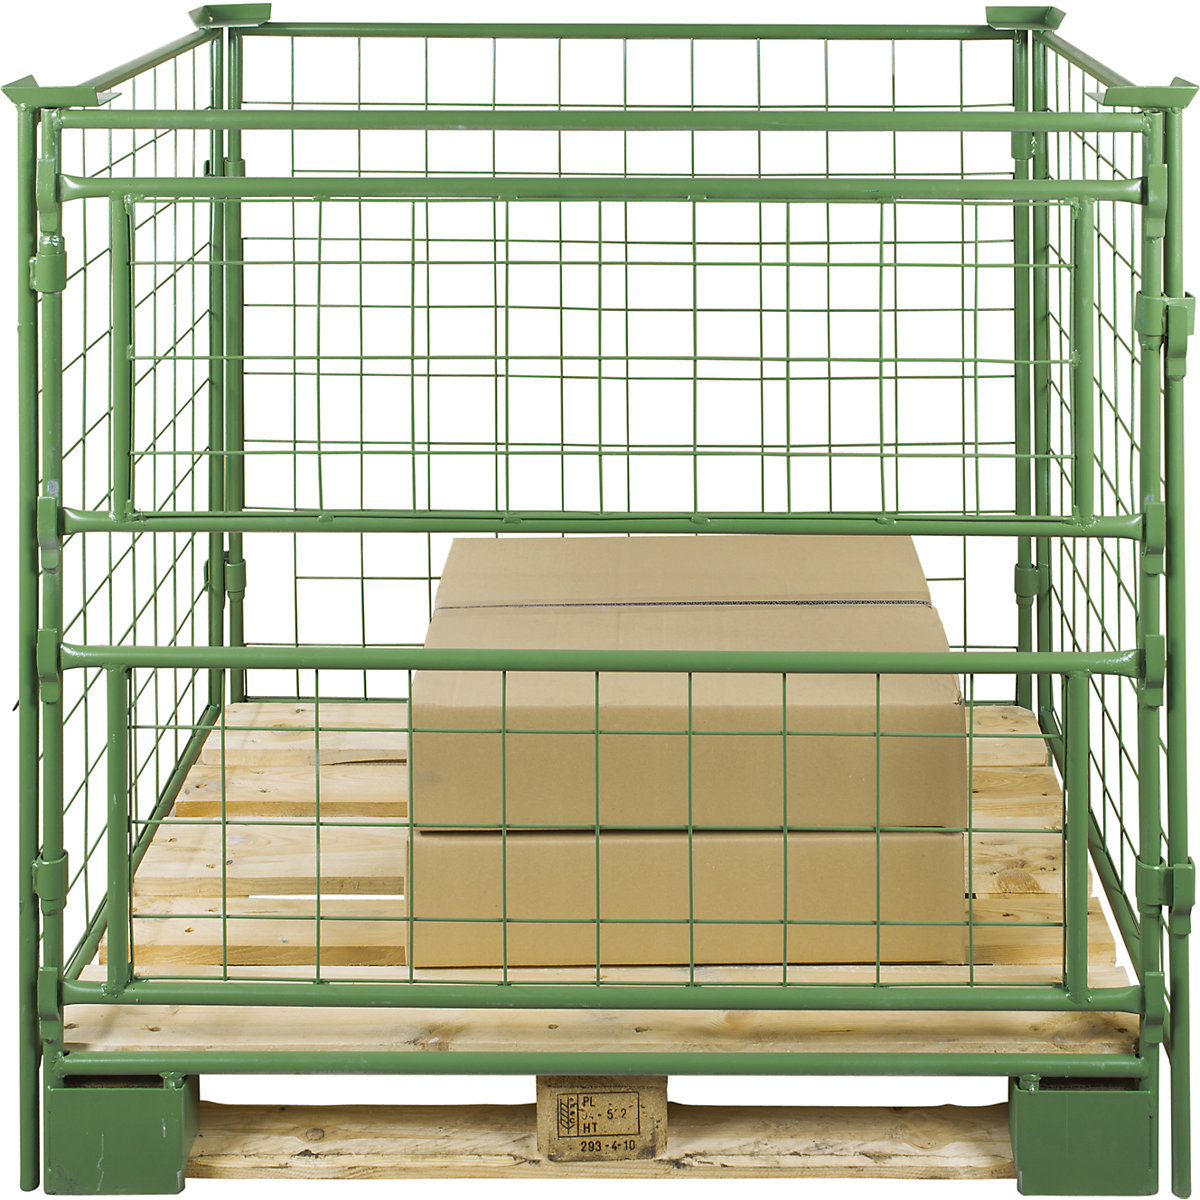 Pallet frame, effective height 1200 mm, for attaching, WxL 800 x 1200 mm, 1 long side with 2 parts, removable